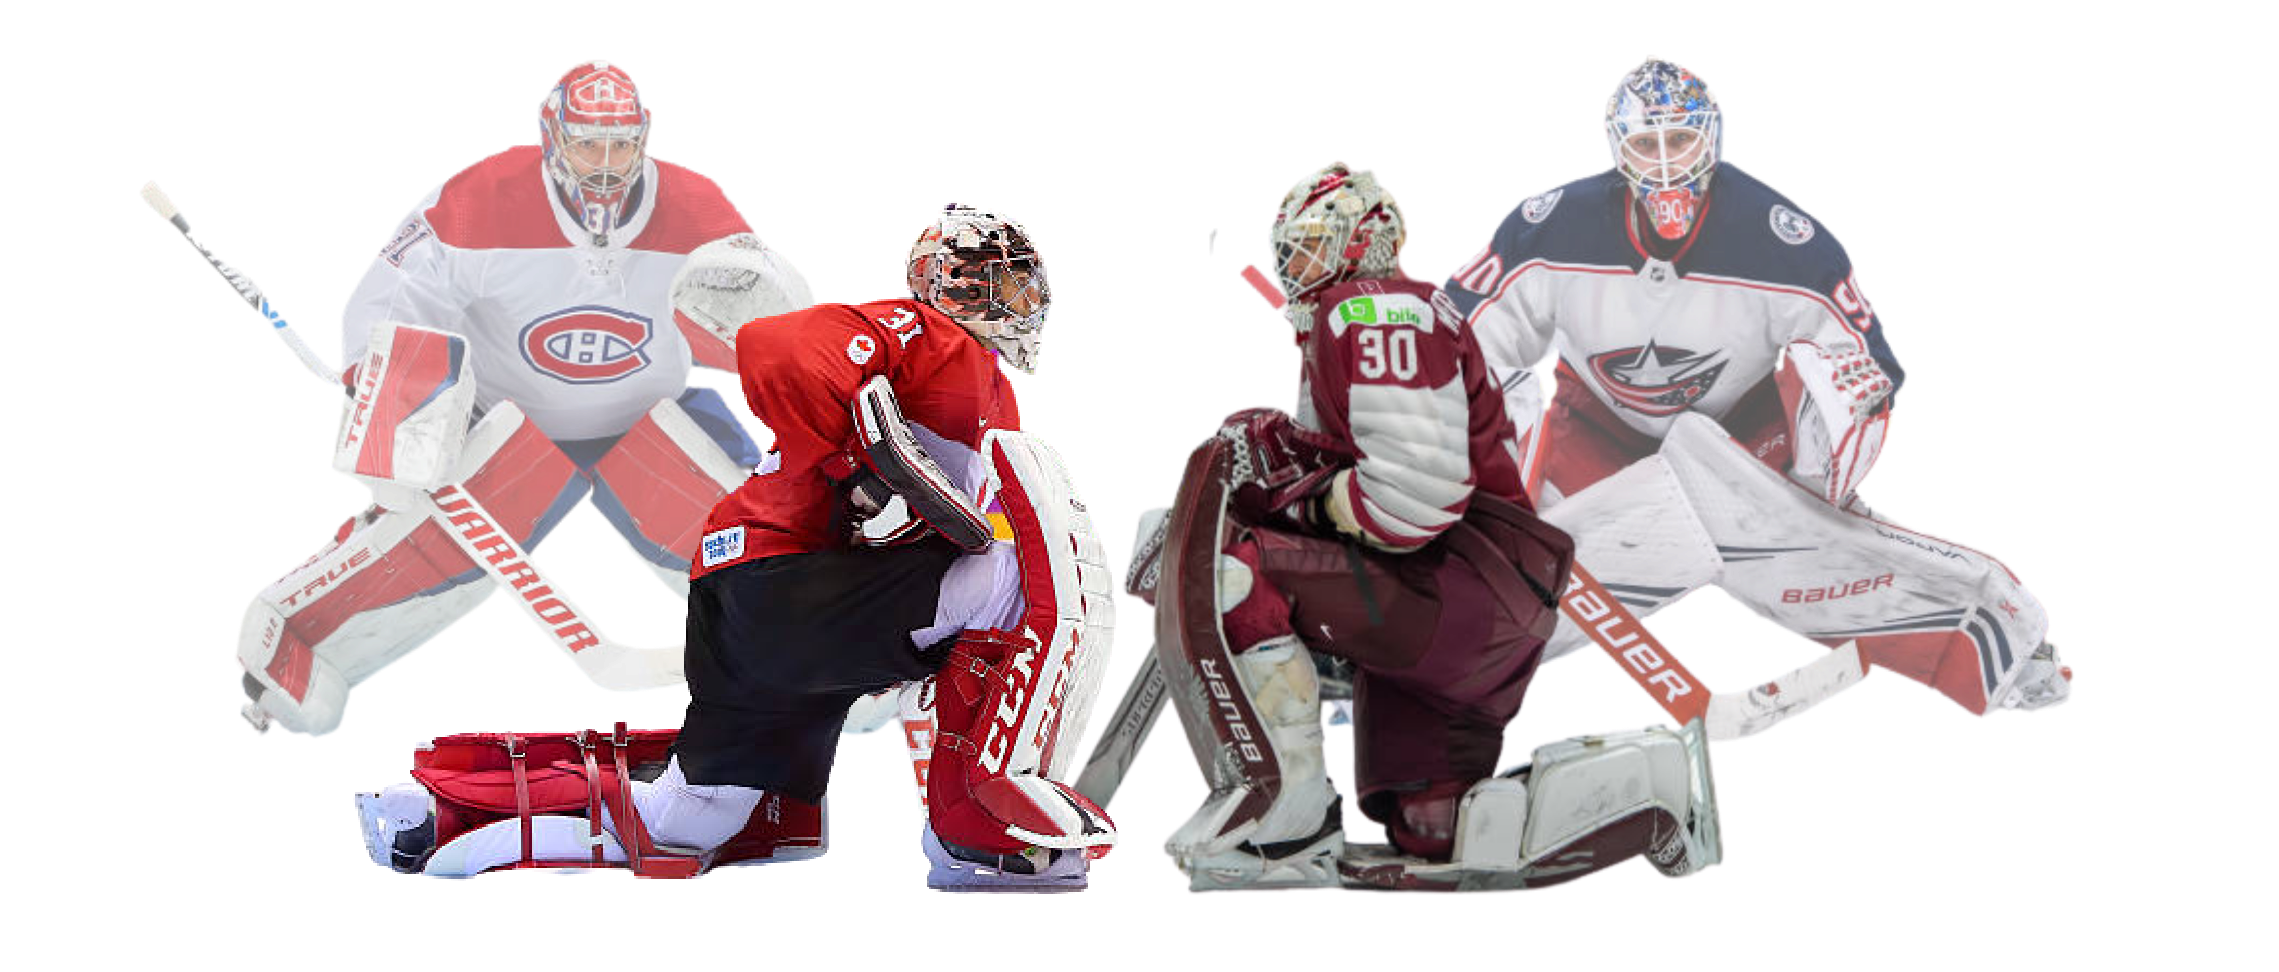 The Sports Corporation NHL Goalies Carey Price of the Montreal Canadiens and Canadian Olympic Team and Elvis Merzlikins of the Columbus Blue Jackets and Latvia international team